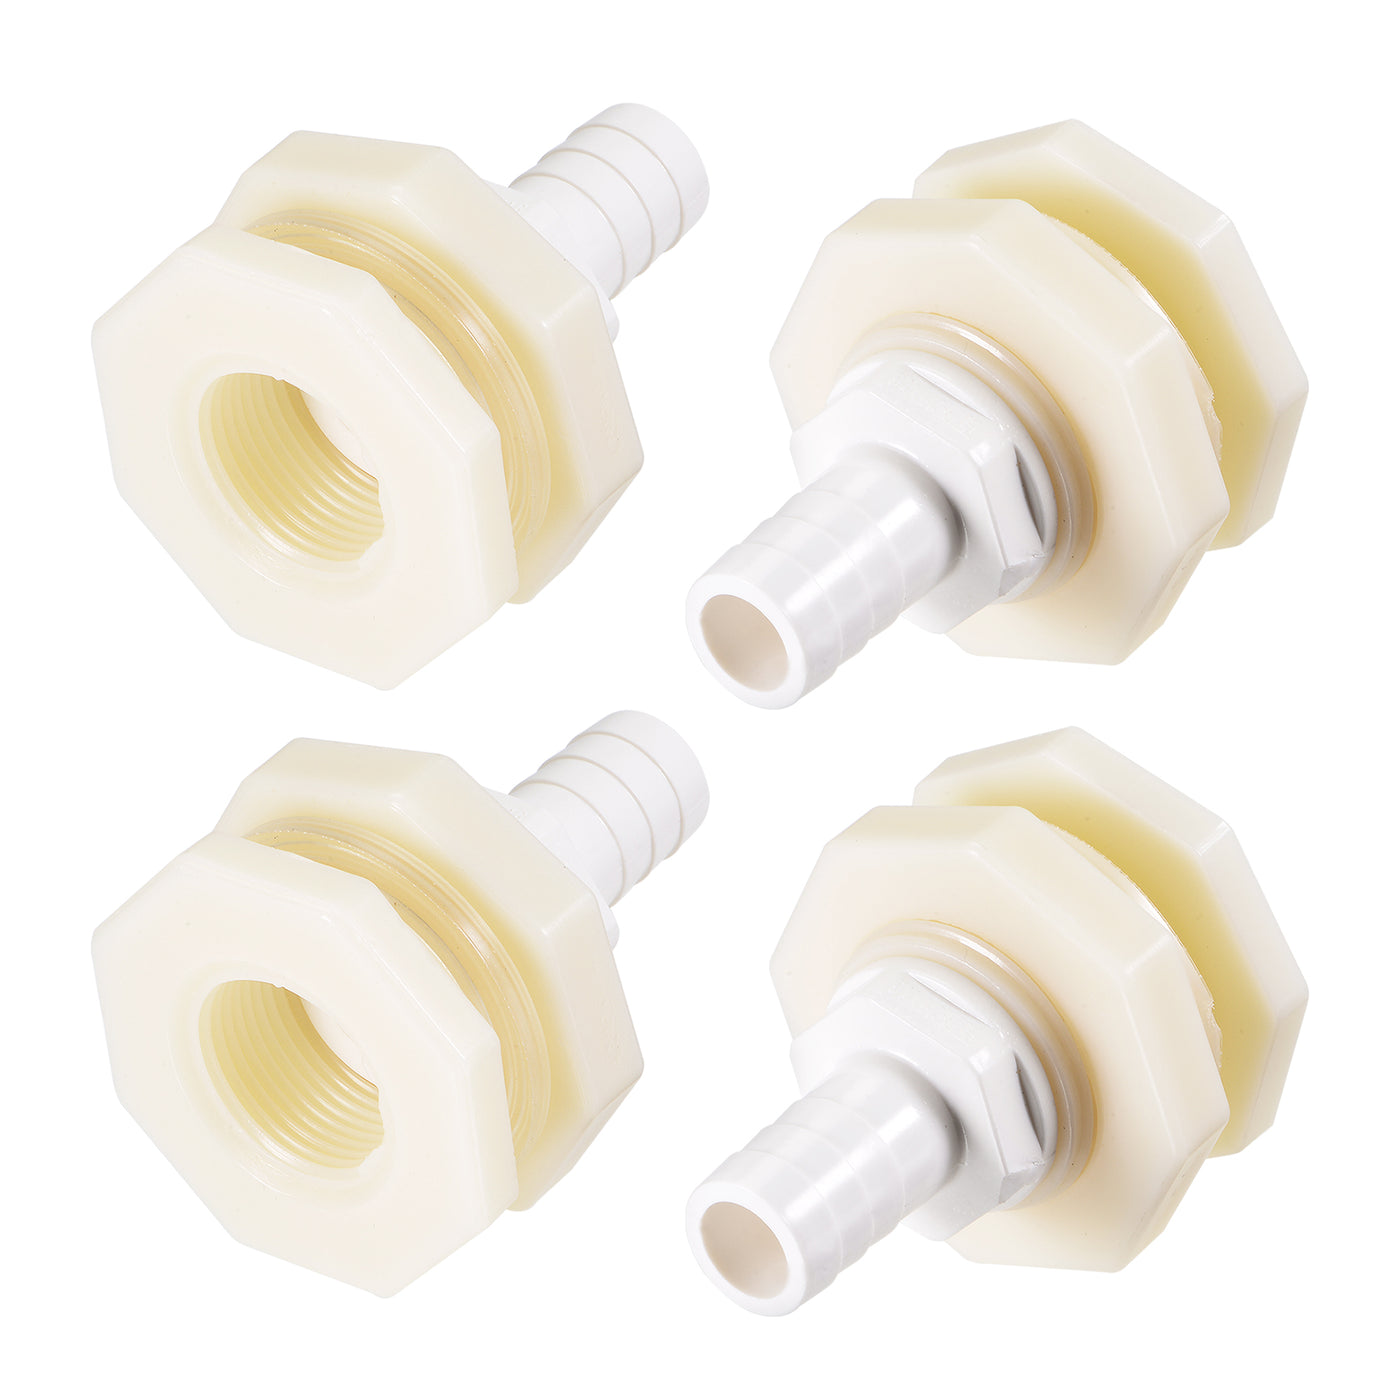 uxcell Uxcell Bulkhead Fitting Adapter 16mm Barbed x G3/4 Female ABS White for Aquariums, Water Tanks, Tubs, Pools 4Pcs